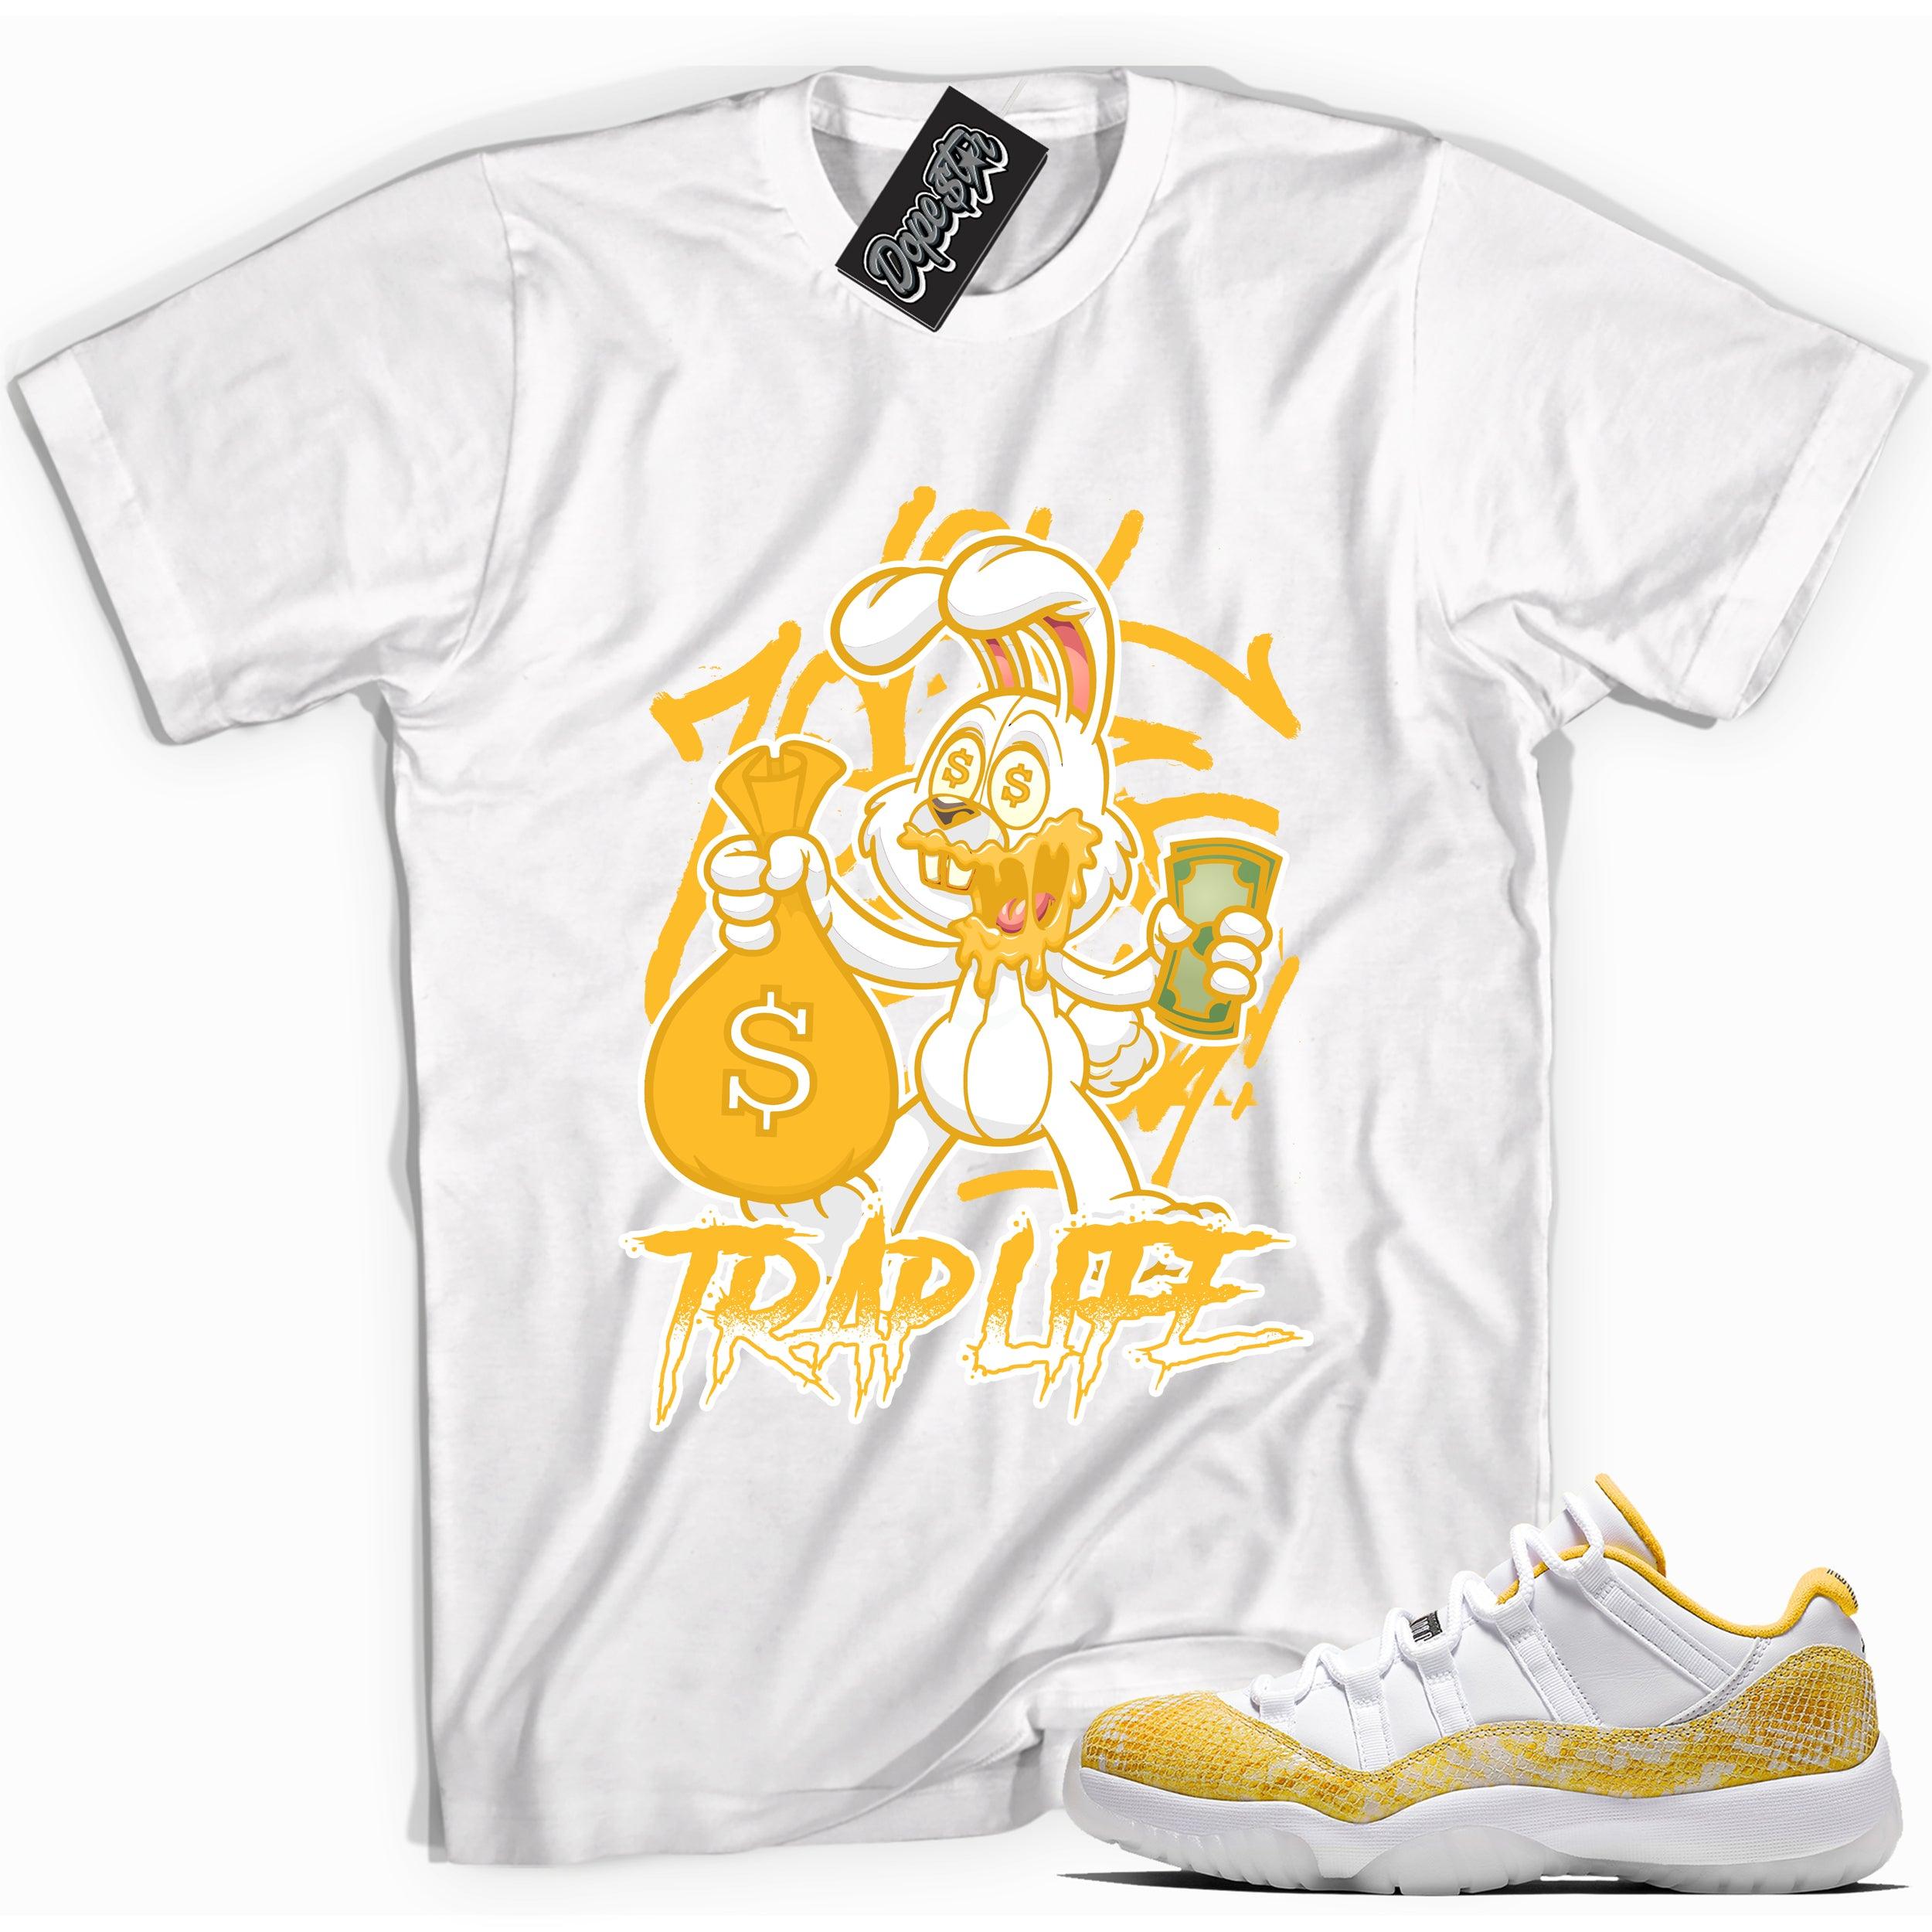 Cool white graphic tee with 'trap life rabbit' print, that perfectly matches Air Jordan 11 Retro Low Yellow Snakeskin sneakers